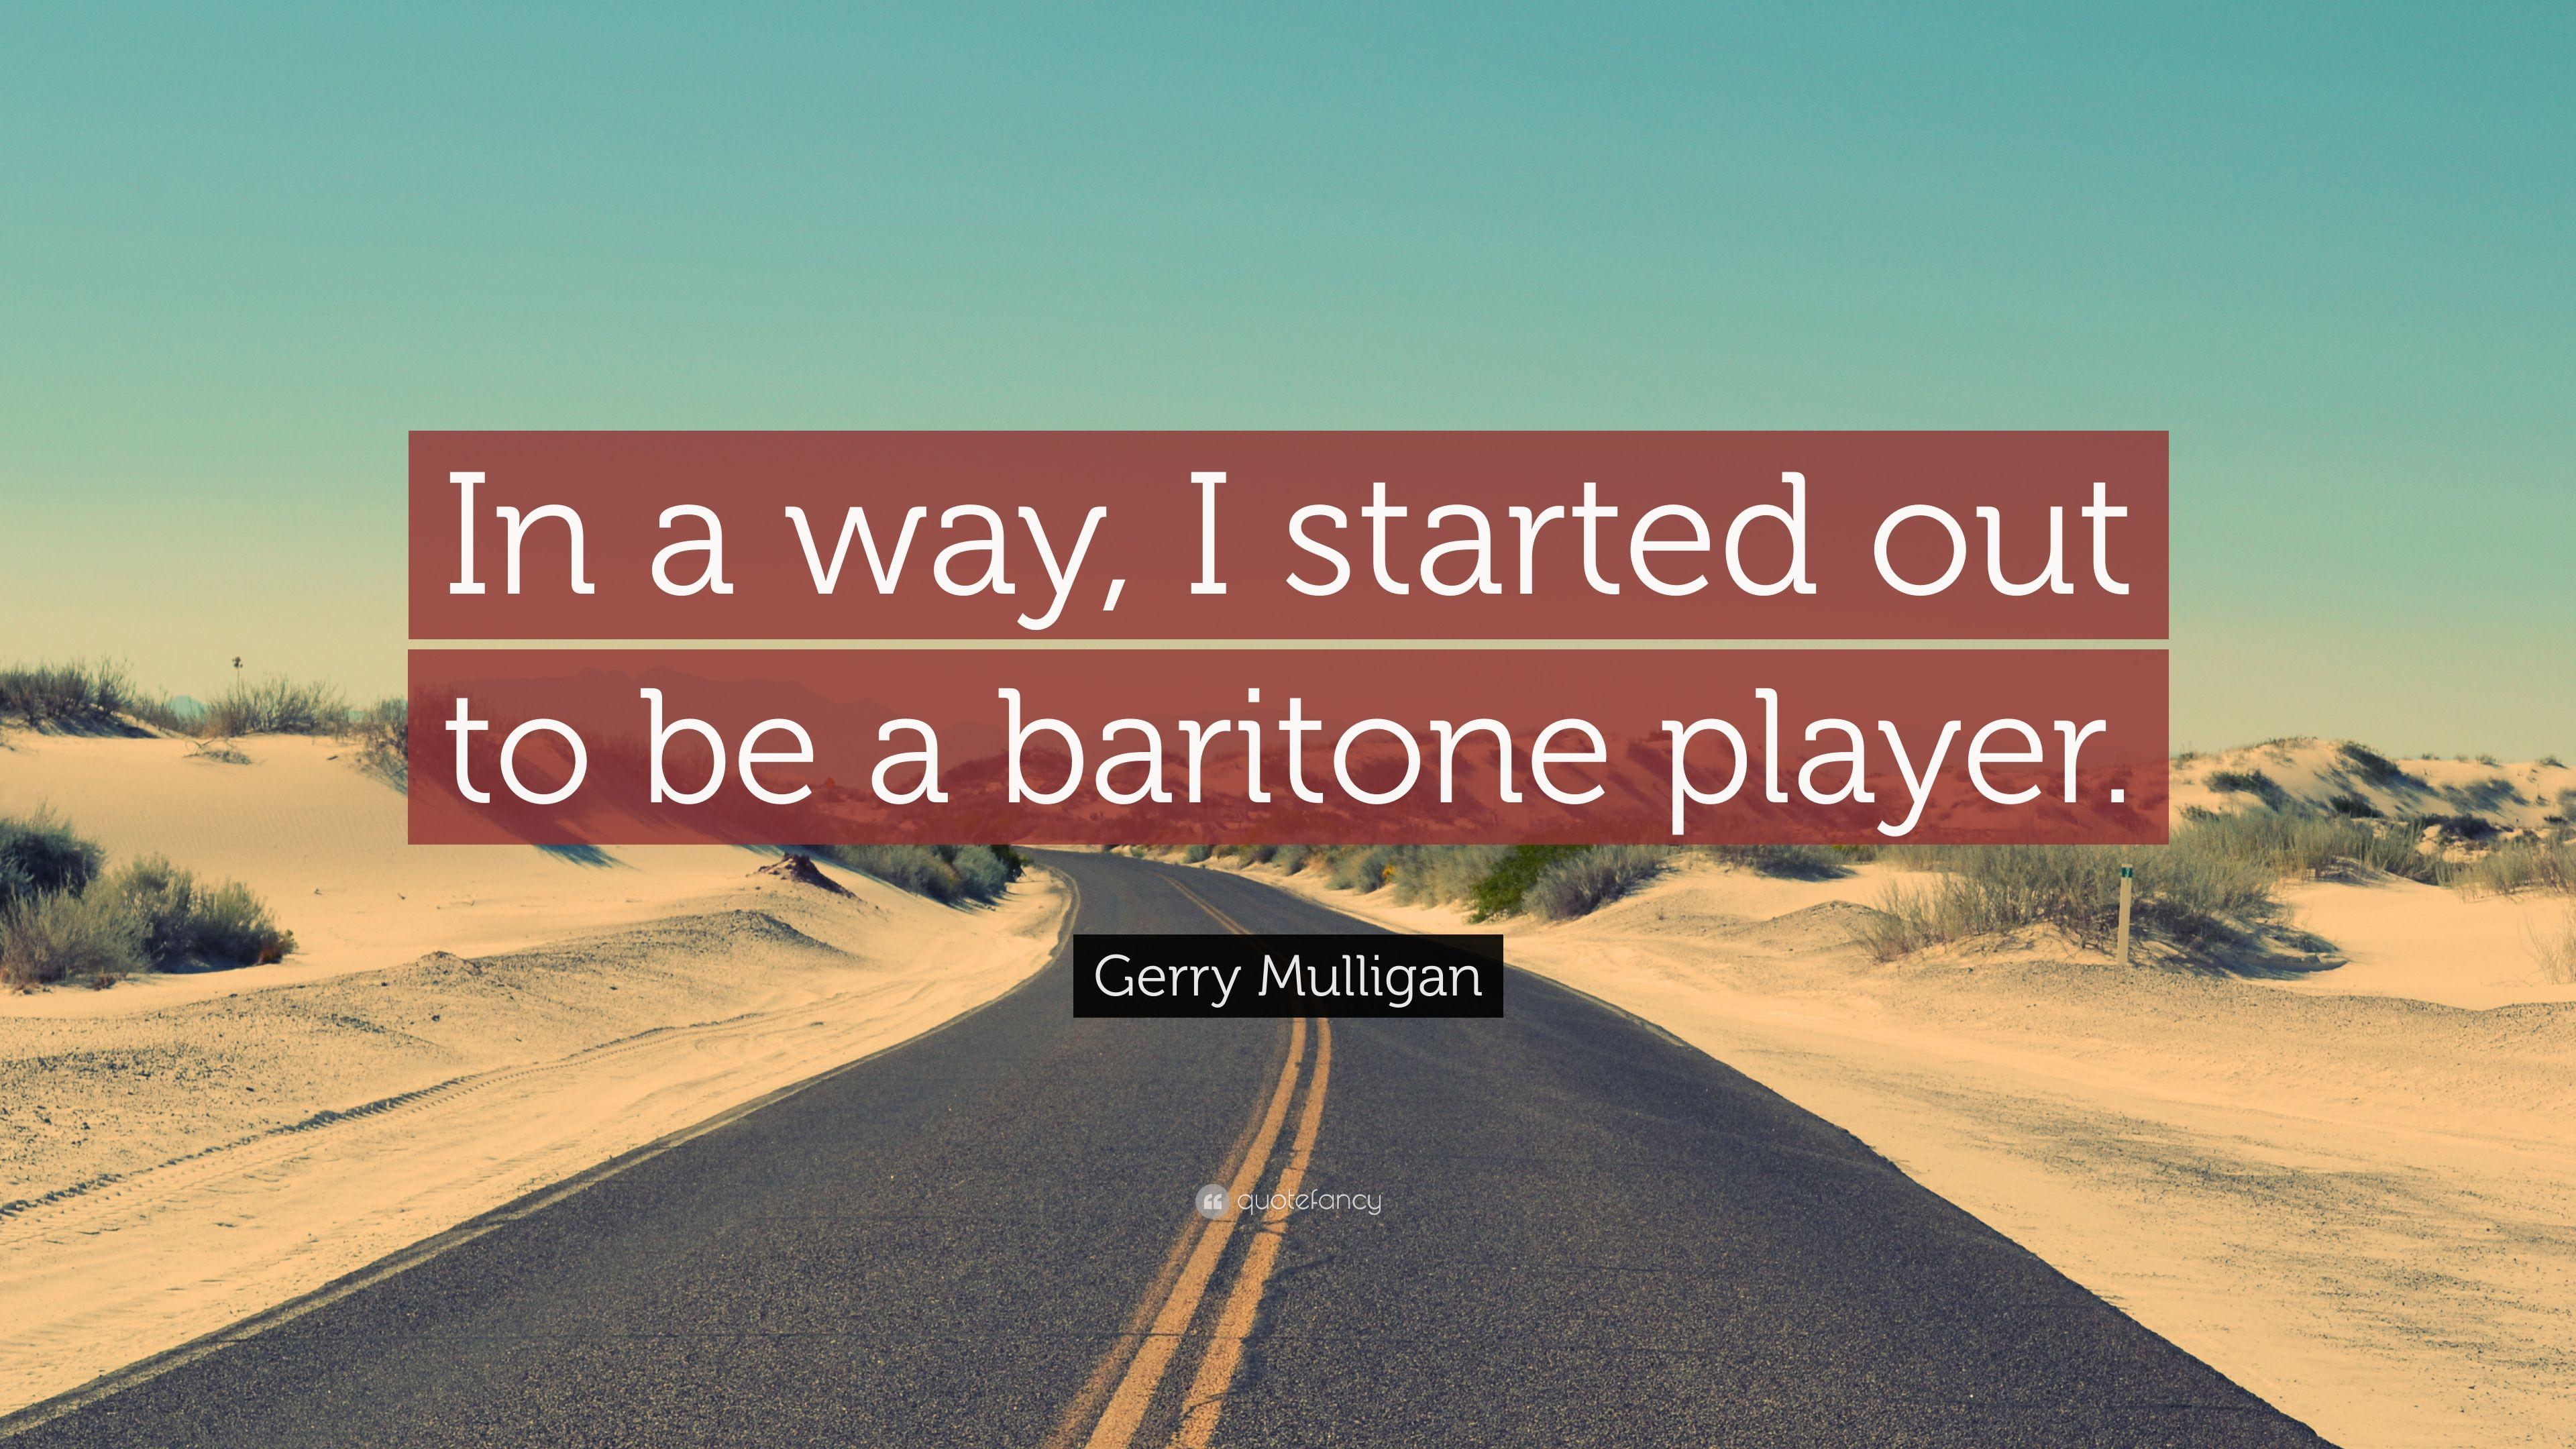 Gerry Mulligan Quote: “In a way, I started out to be a baritone